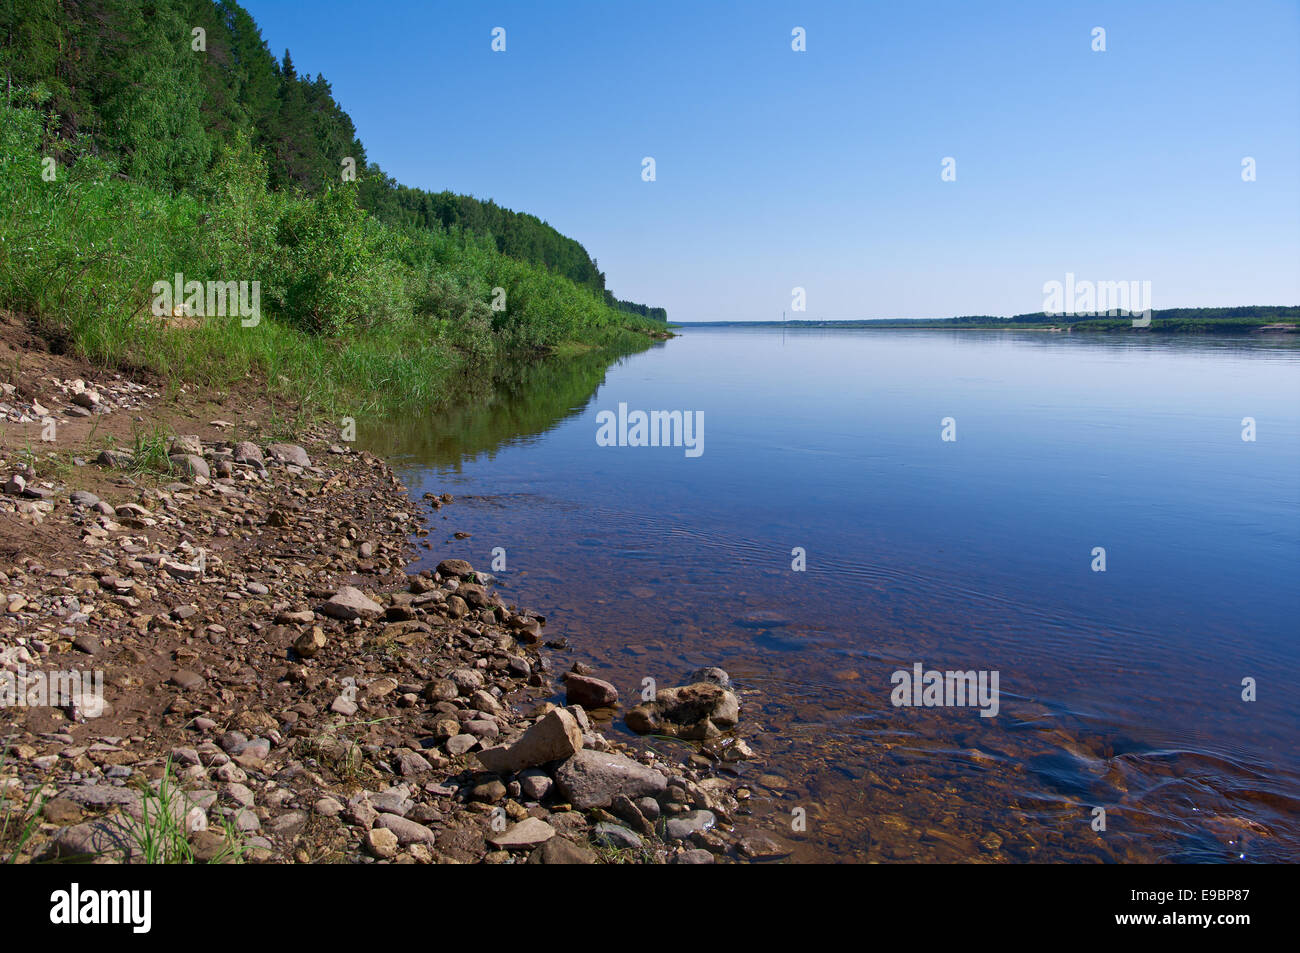 Pinyega River of Arkhangelsk Oblast in Russia. Stock Photo